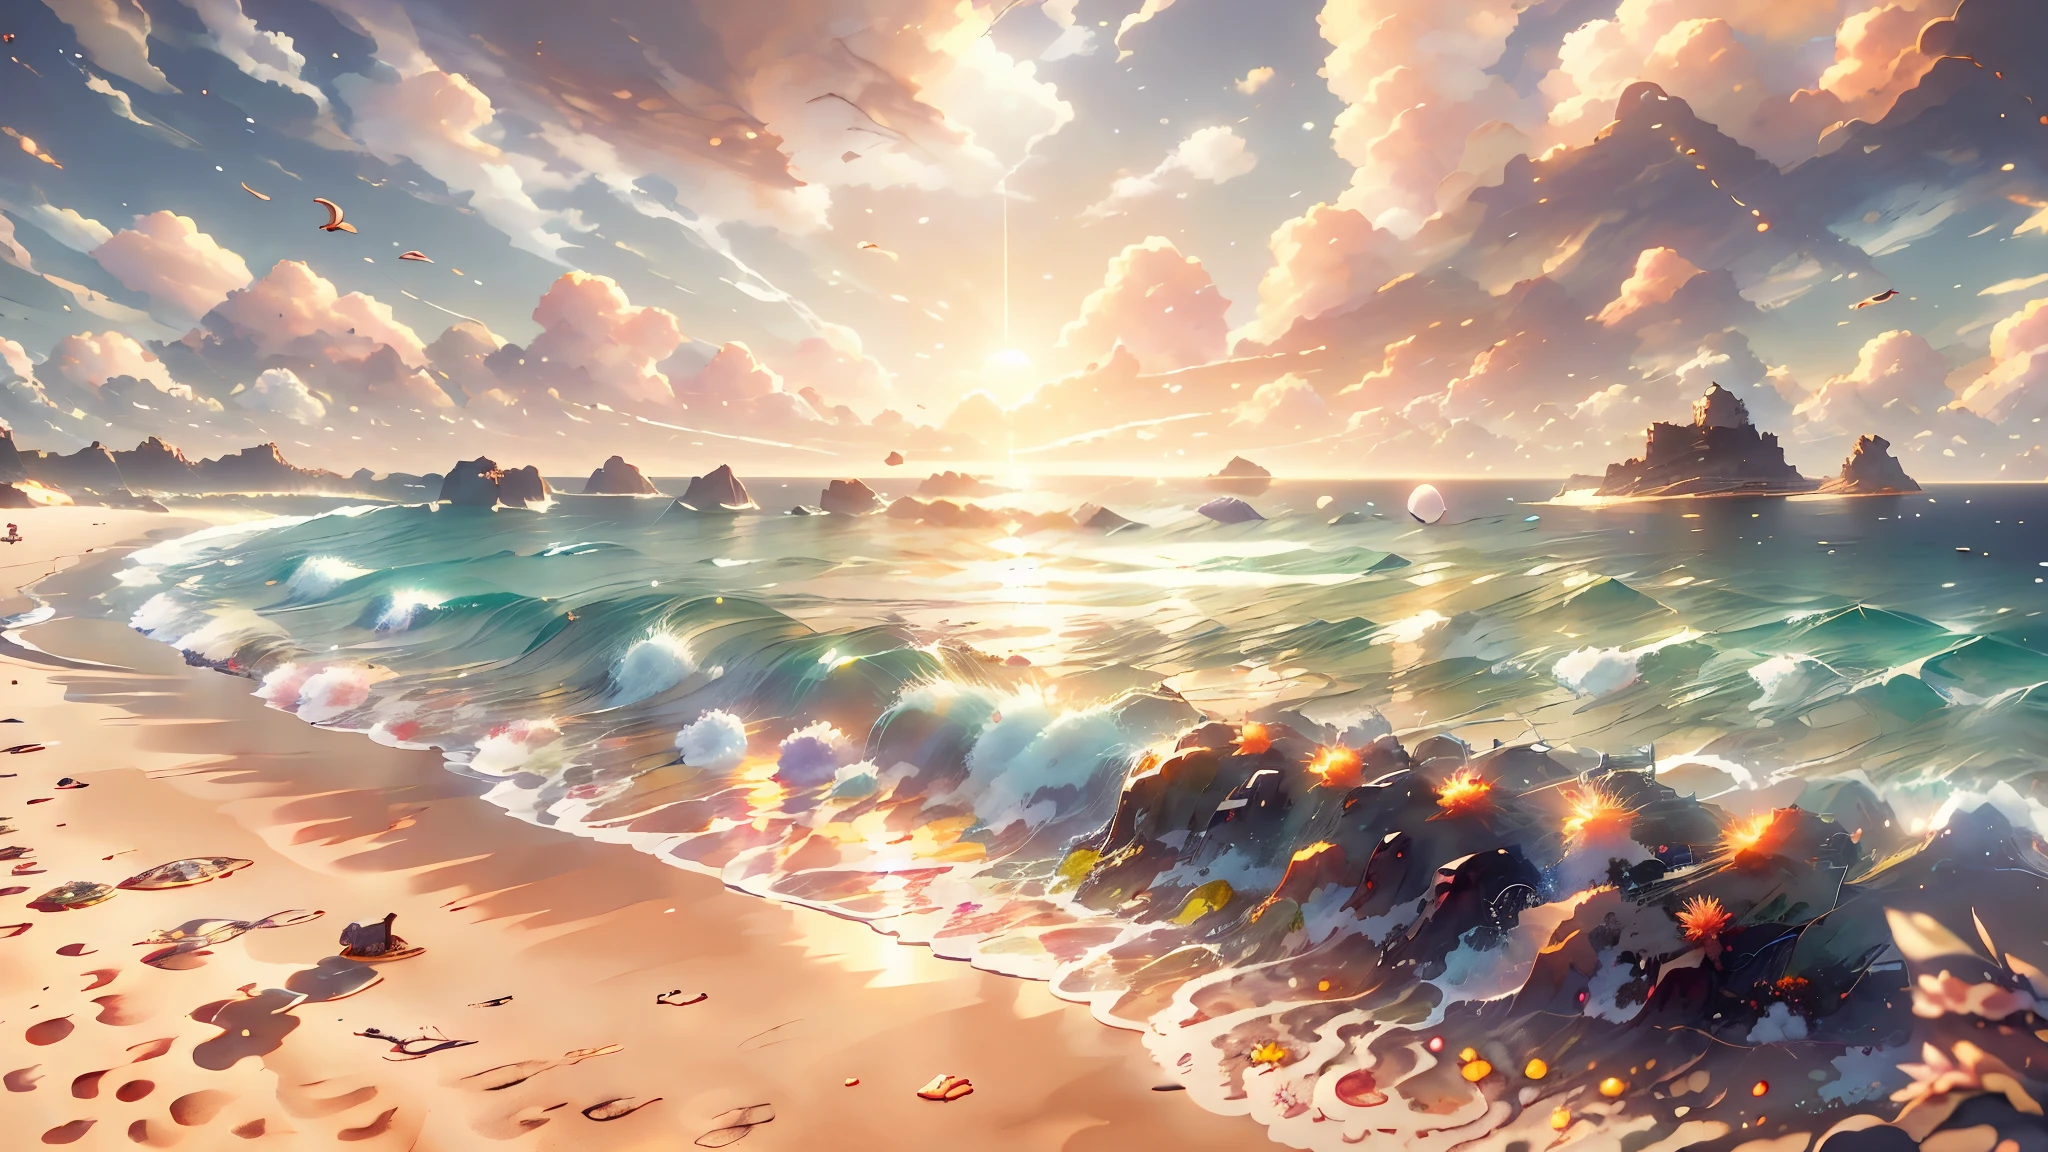 Masterpiece, best quality, 8k, panoramic view, magical scenery, outdoor day, Beach, Sand that looks like a golden carpet. Sky, cloud, day, without humans, soft sound, waves, Starfish, chatty crabs, noisy seagulls, which filled the environment with their animation.